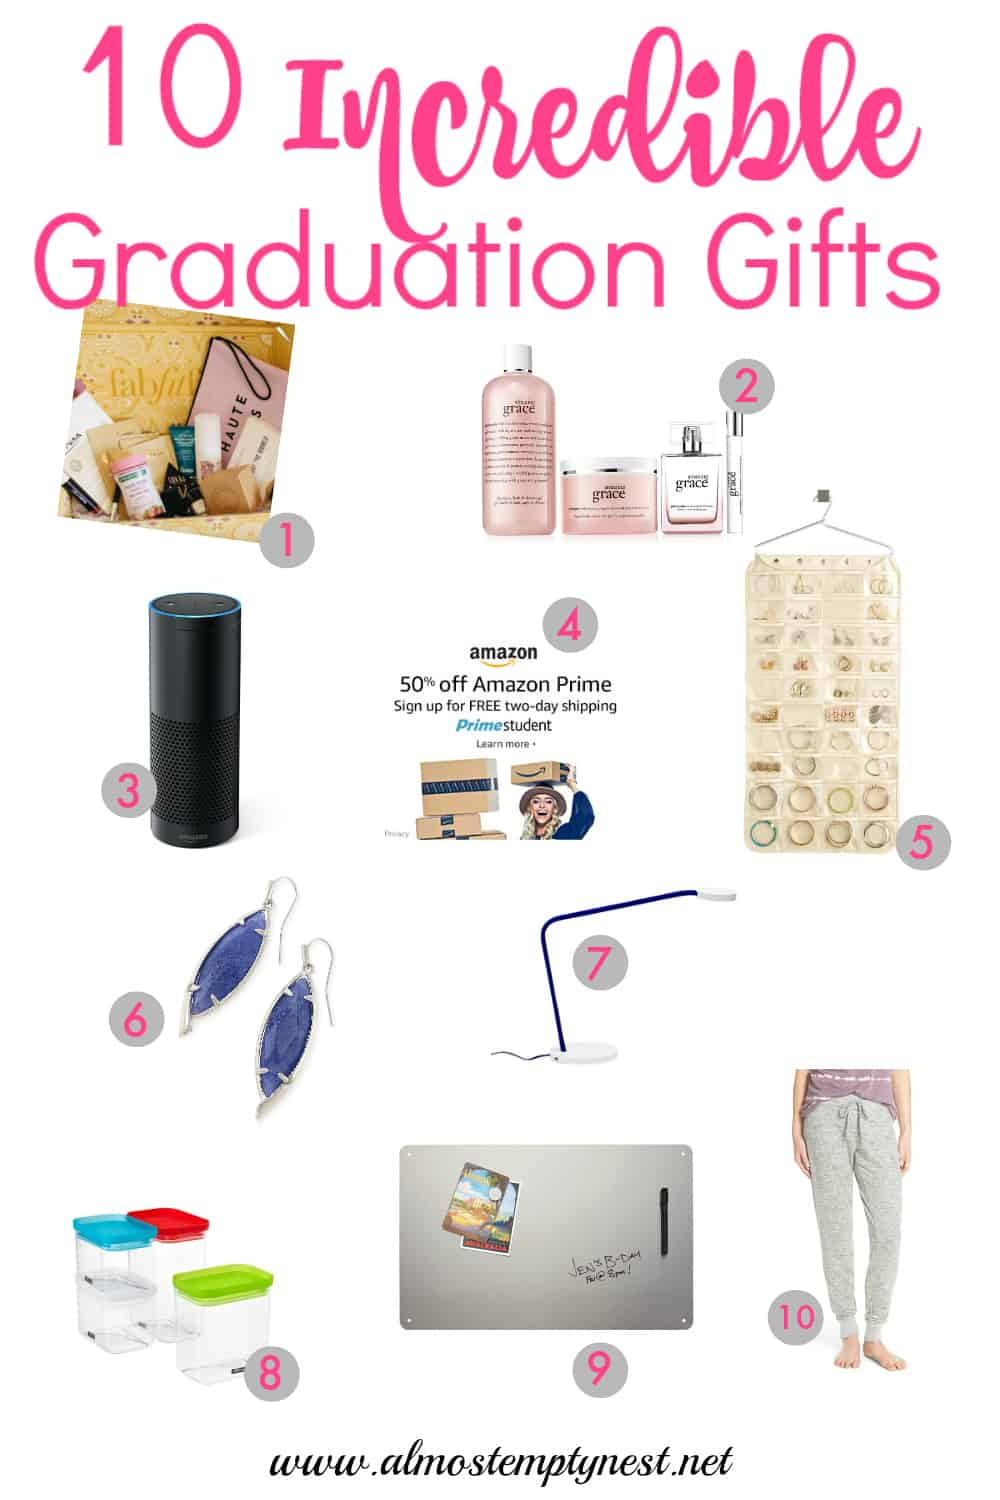 Girlfriend Graduation Gift Ideas
 10 Incredible Graduation Gifts for Girls Almost Empty Nest